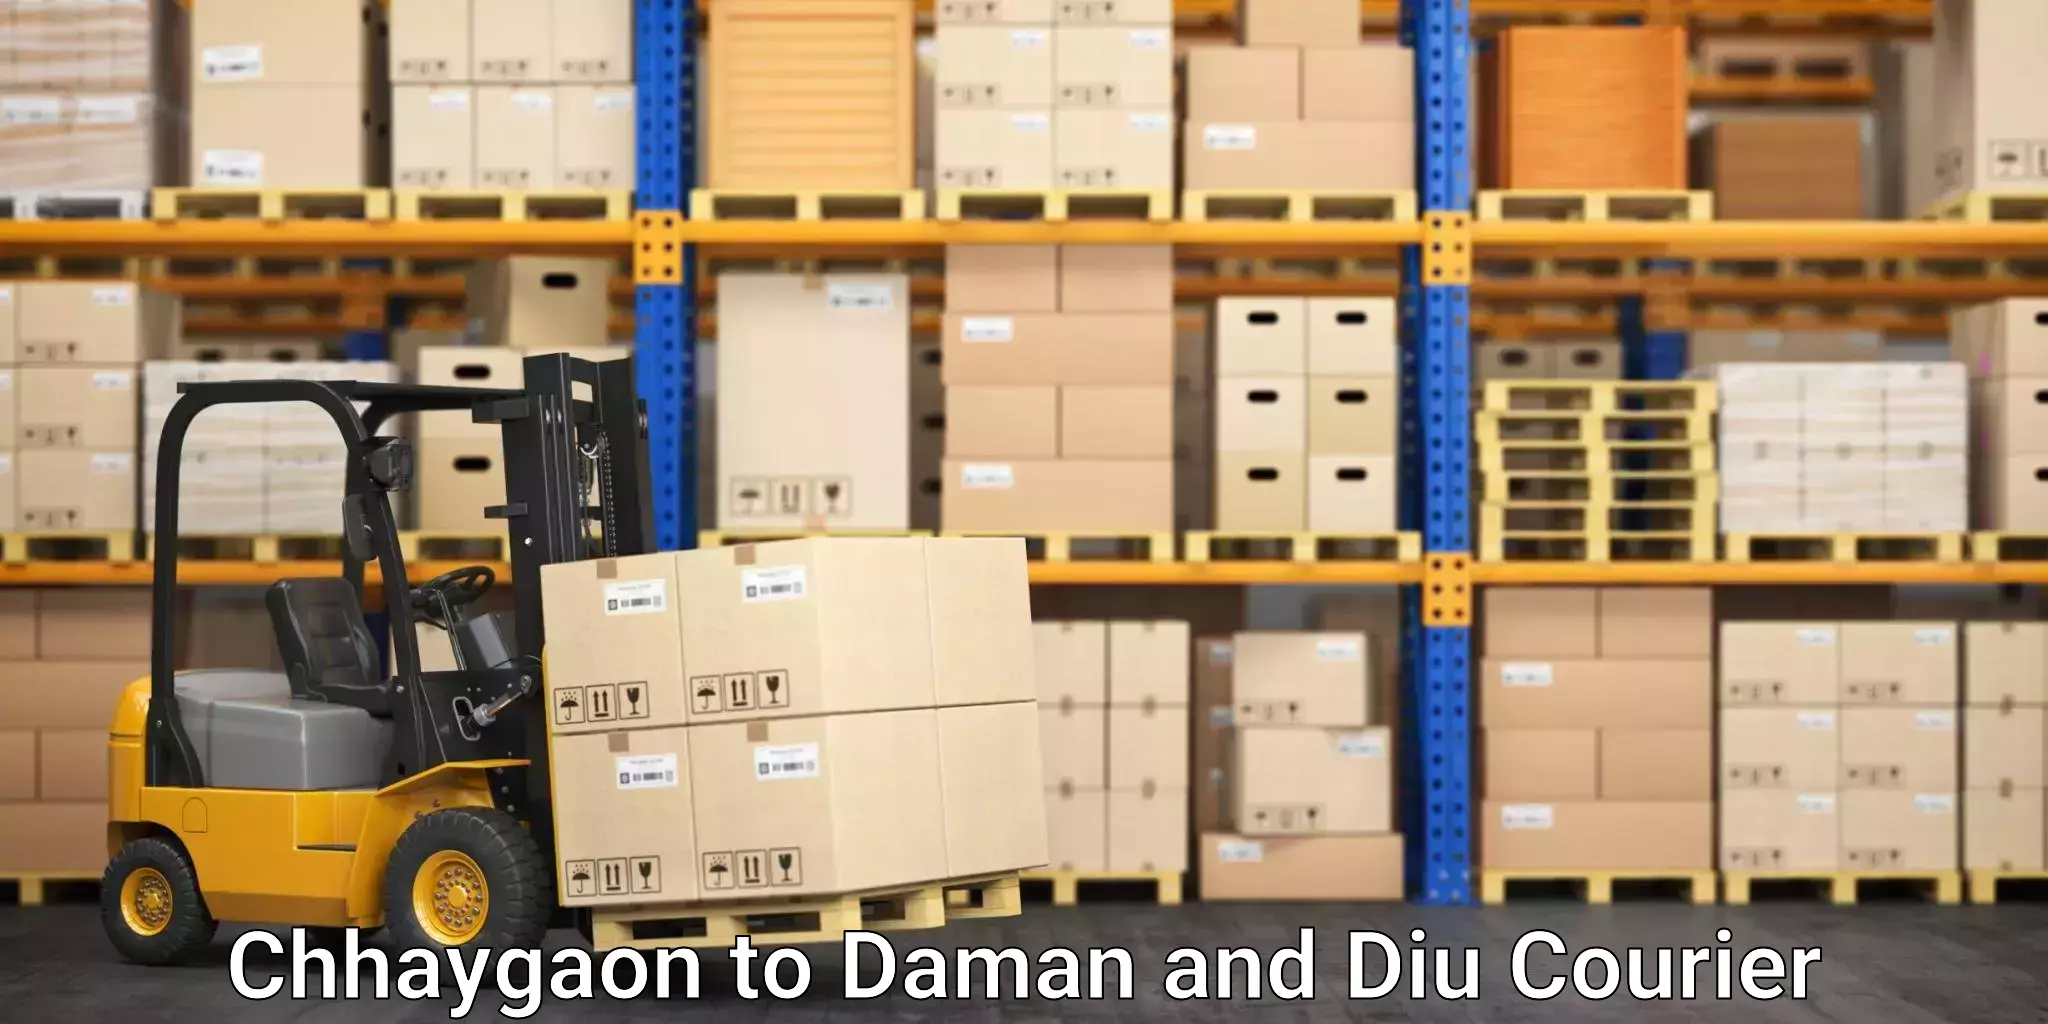 Secure packaging Chhaygaon to Daman and Diu